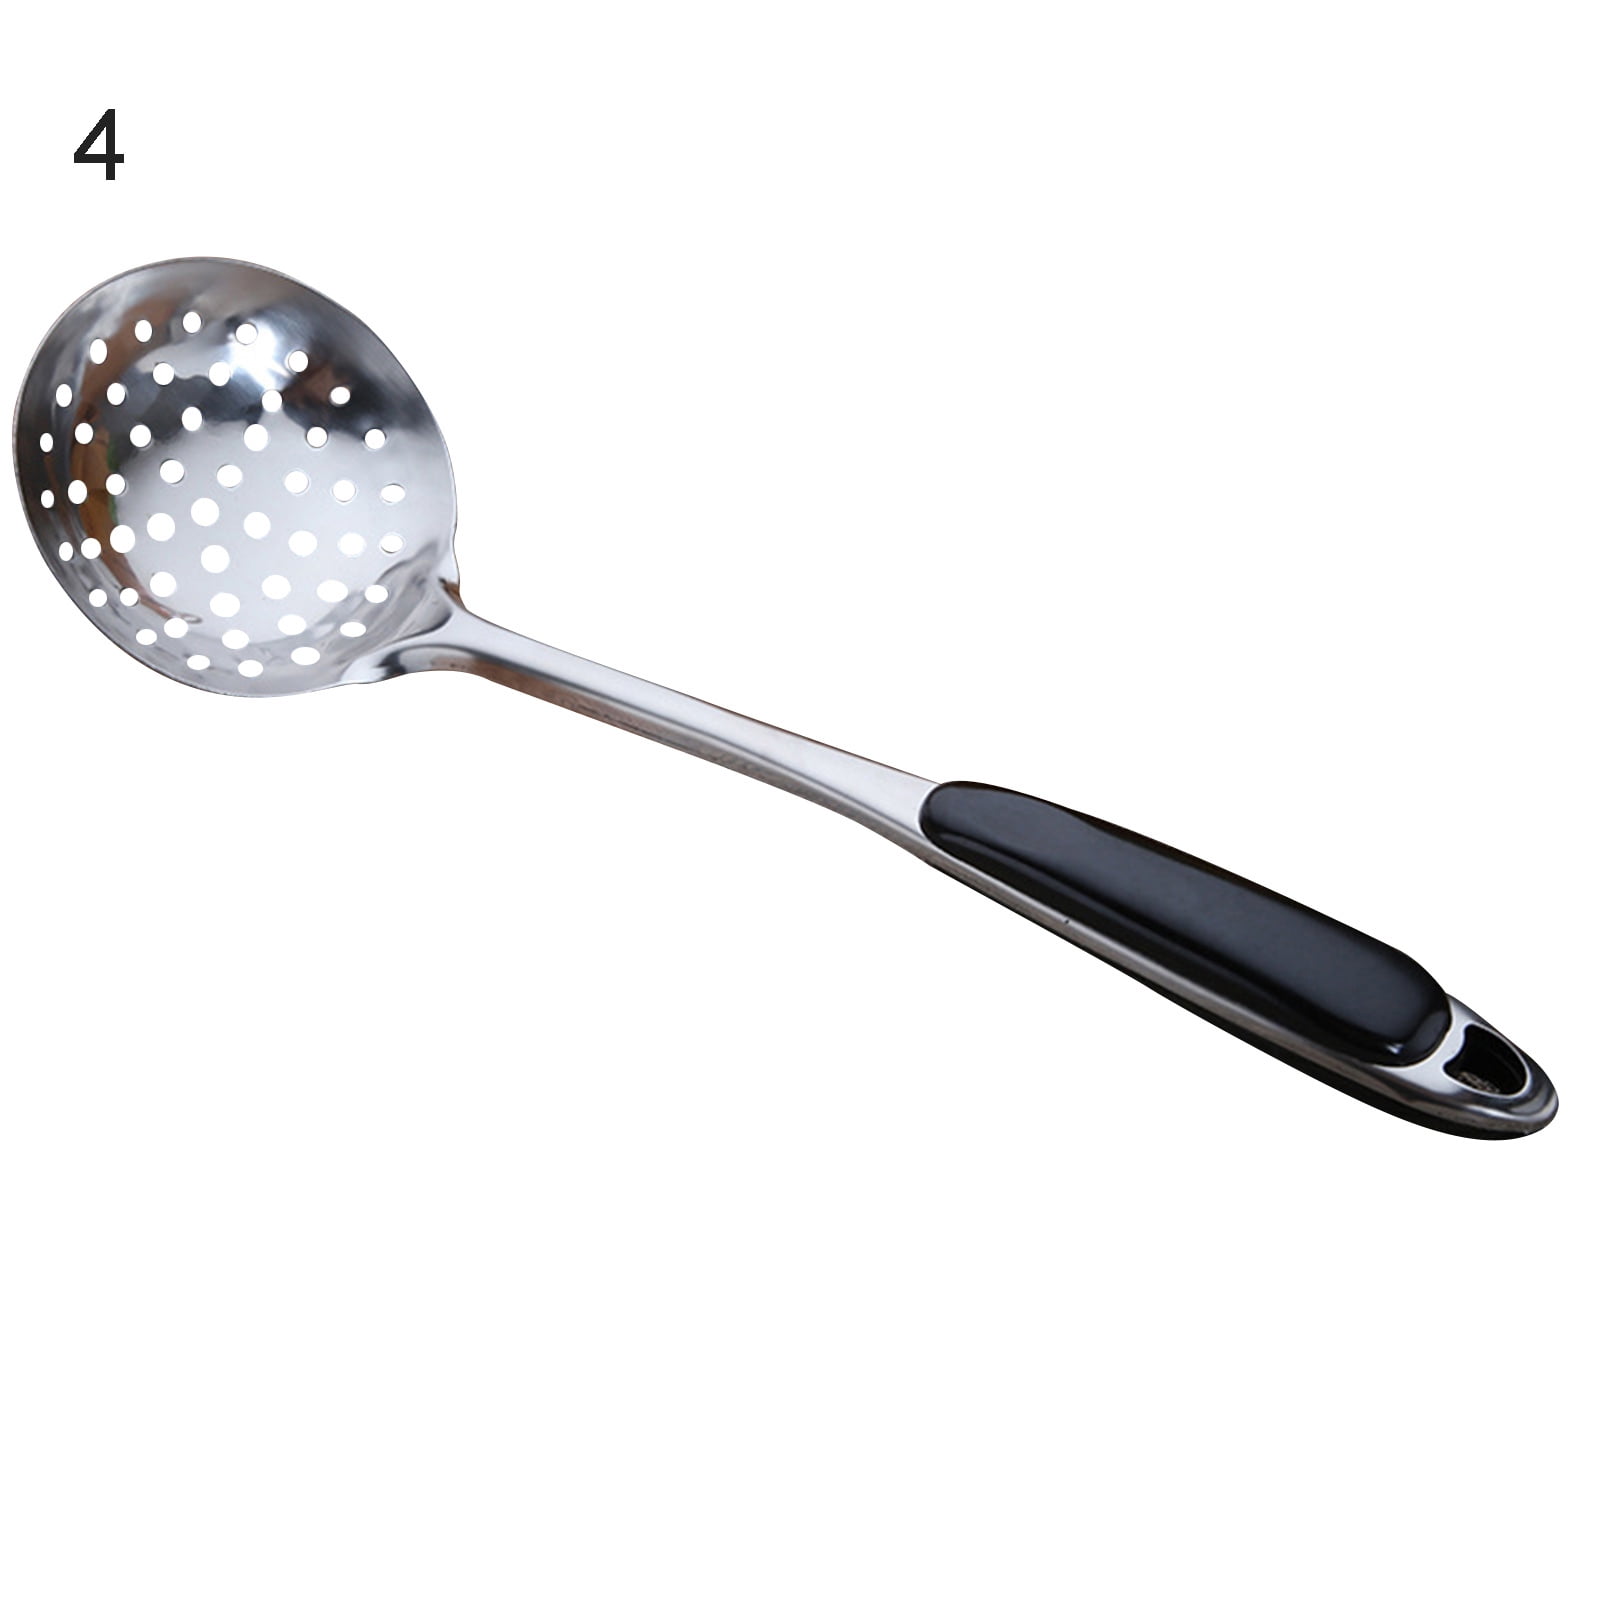 Cheers US Hot Pot Strainer Scoops Hotpot Soup Ladle Spoon Set Skimmer Spoon  Slotted Strainer Ladle Gravy Ladle Colander Kitchen Cooking Utensil 